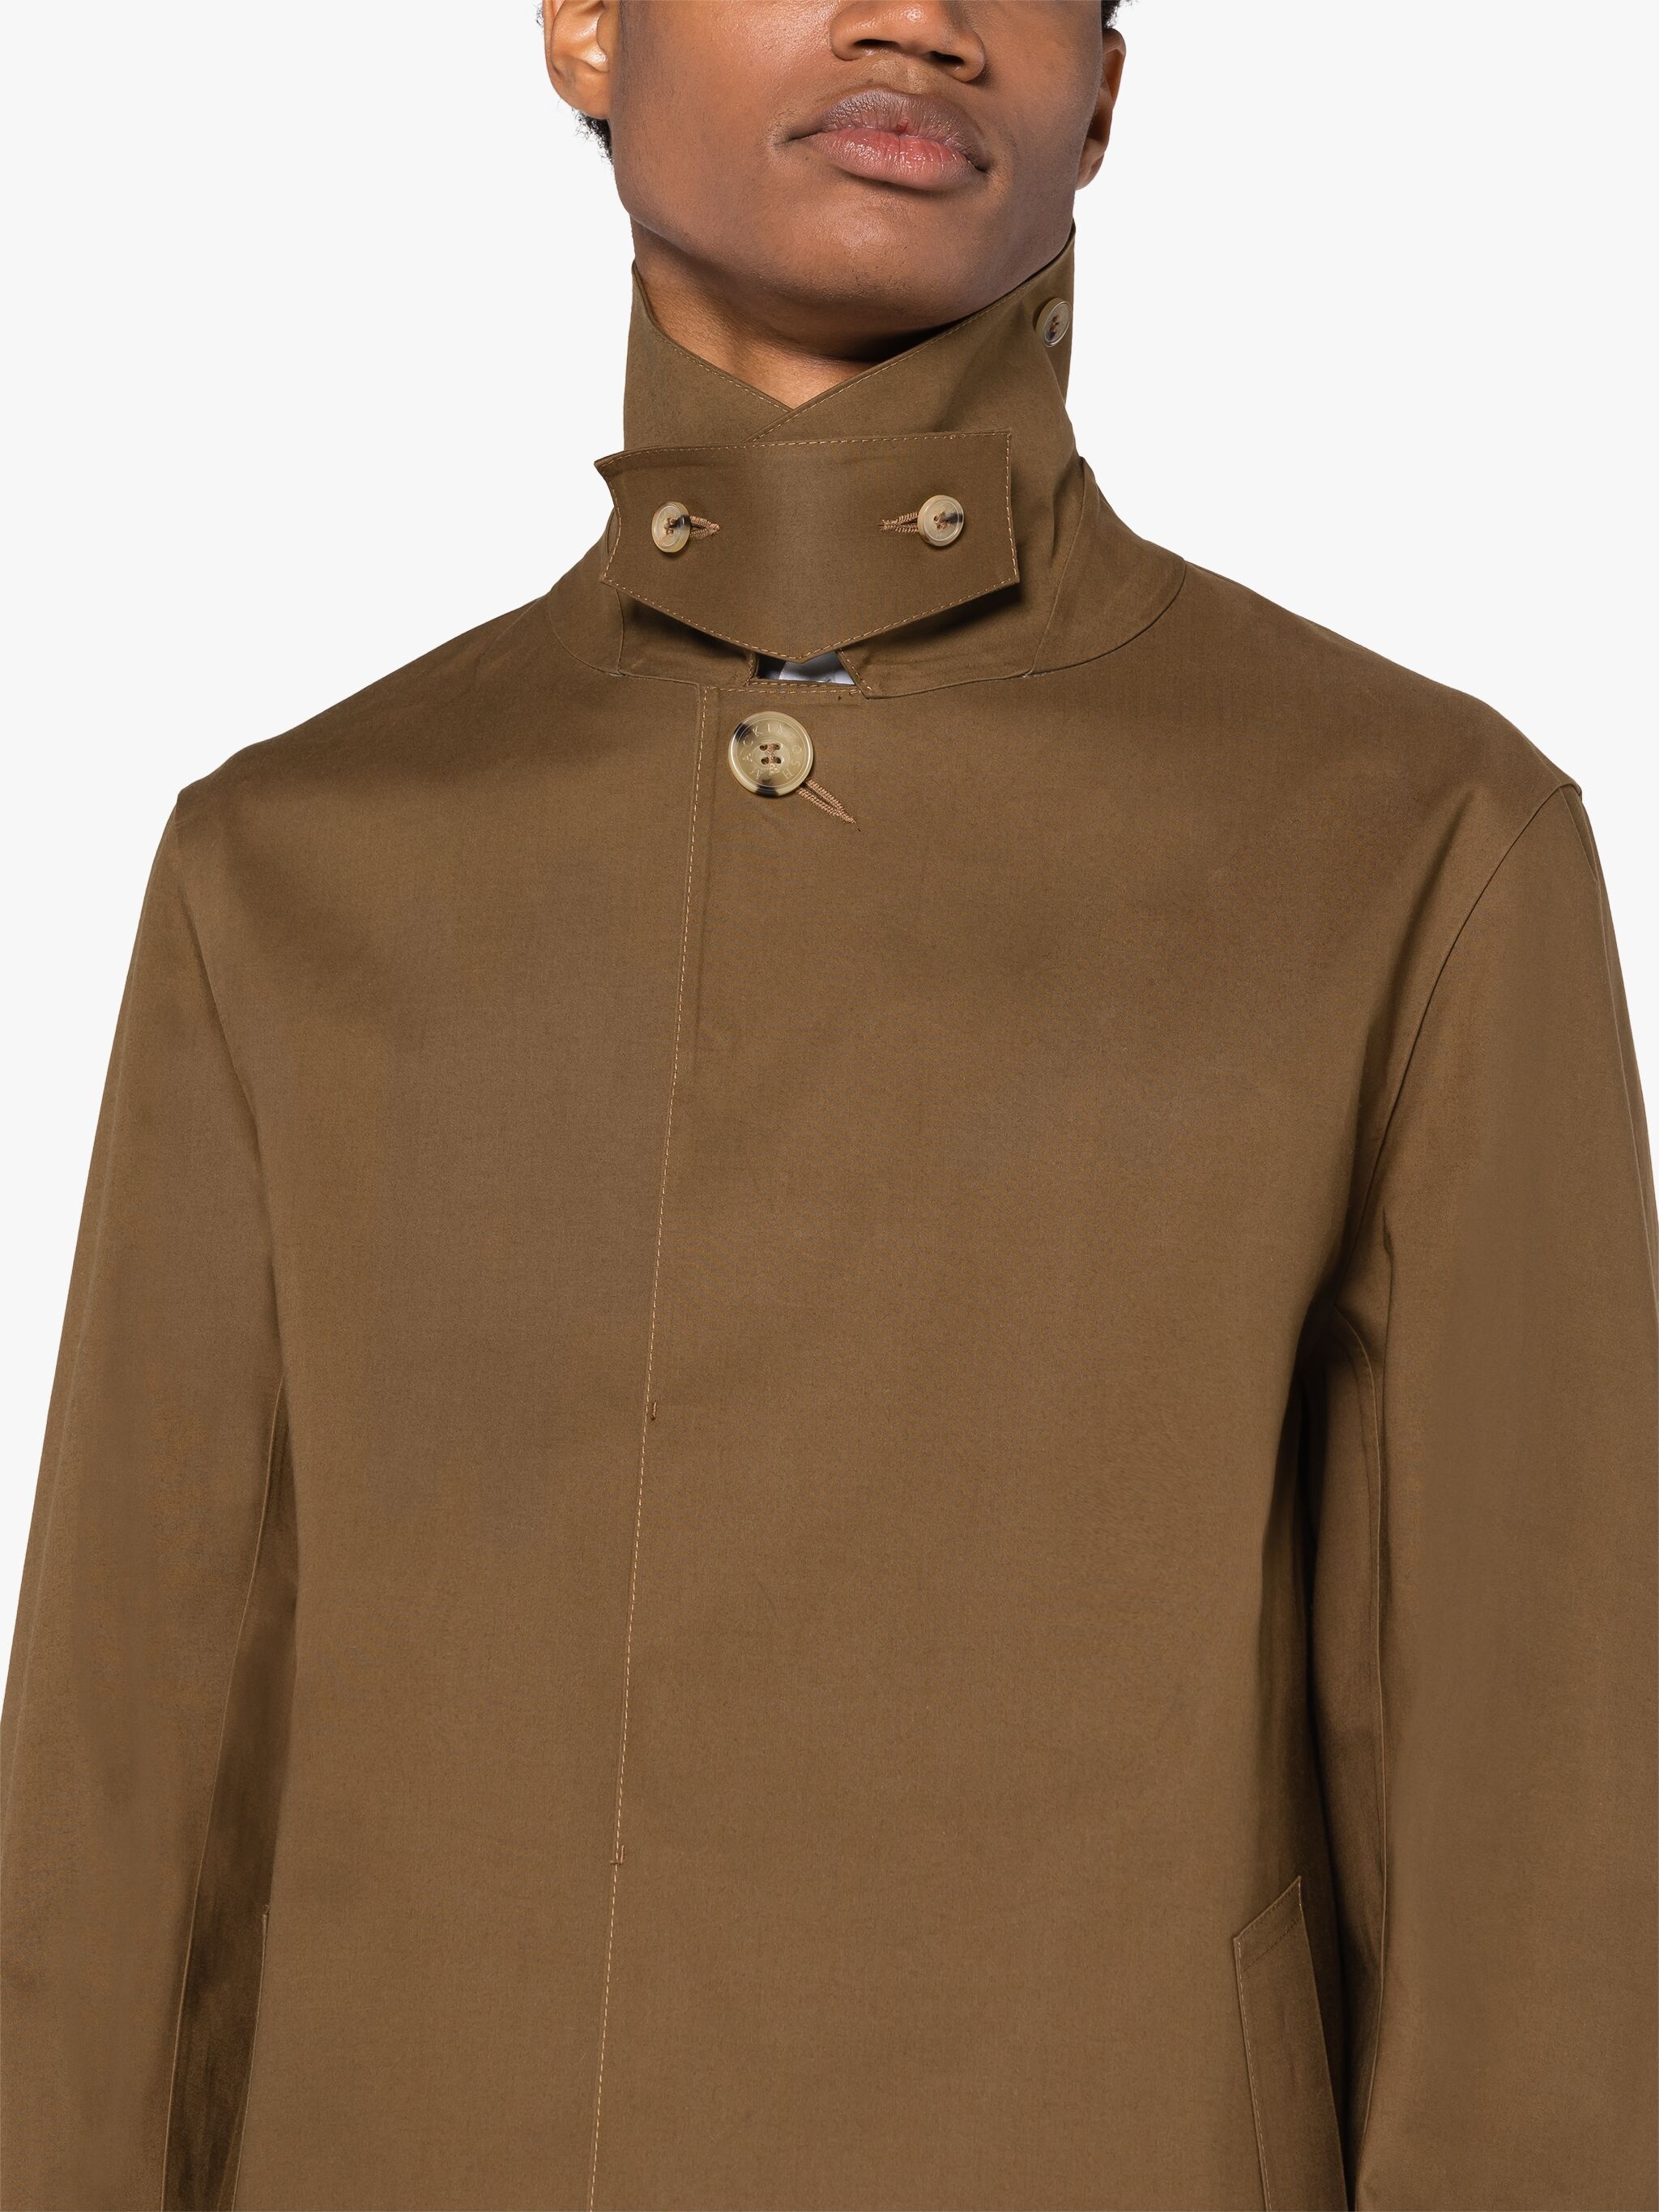 OXFORD BROWN BONDED COTTON 3/4 COAT - 5